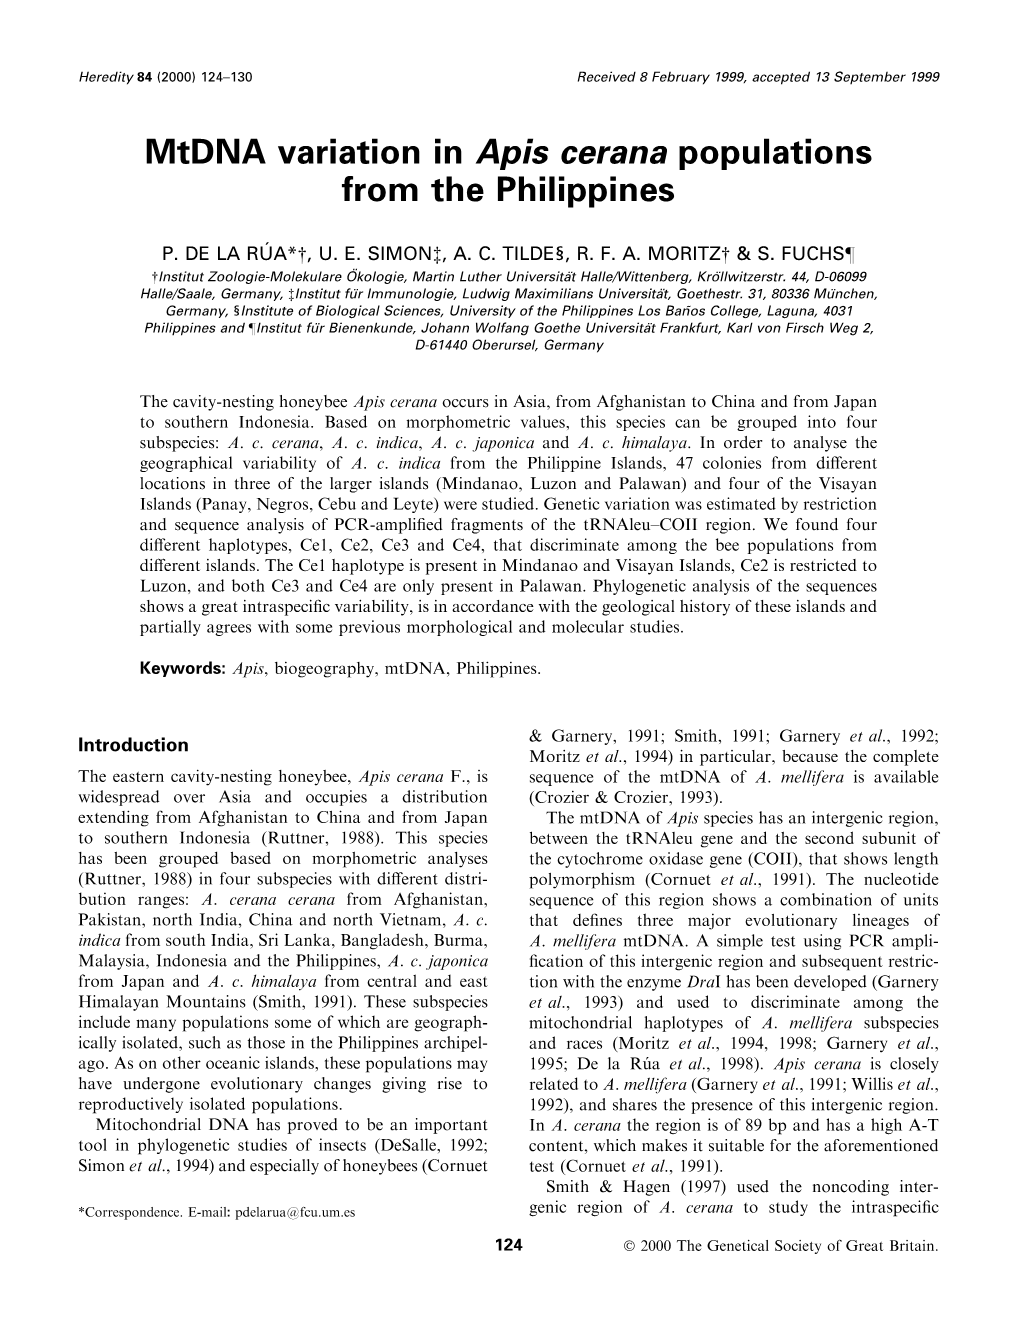 Mtdna Variation in Apis Cerana Populations from the Philippines